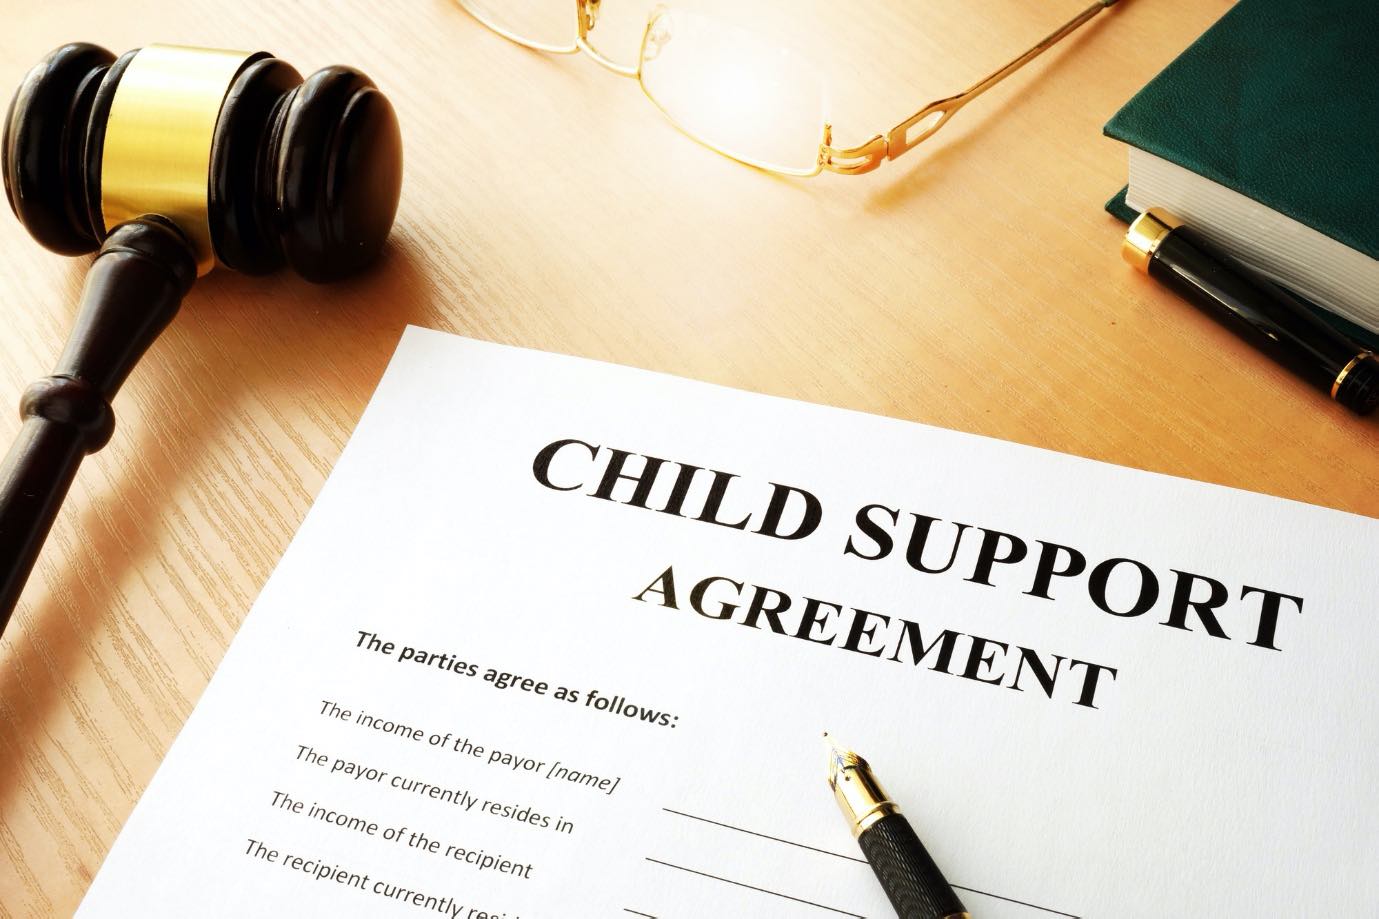 Child Support Services in the Midwest